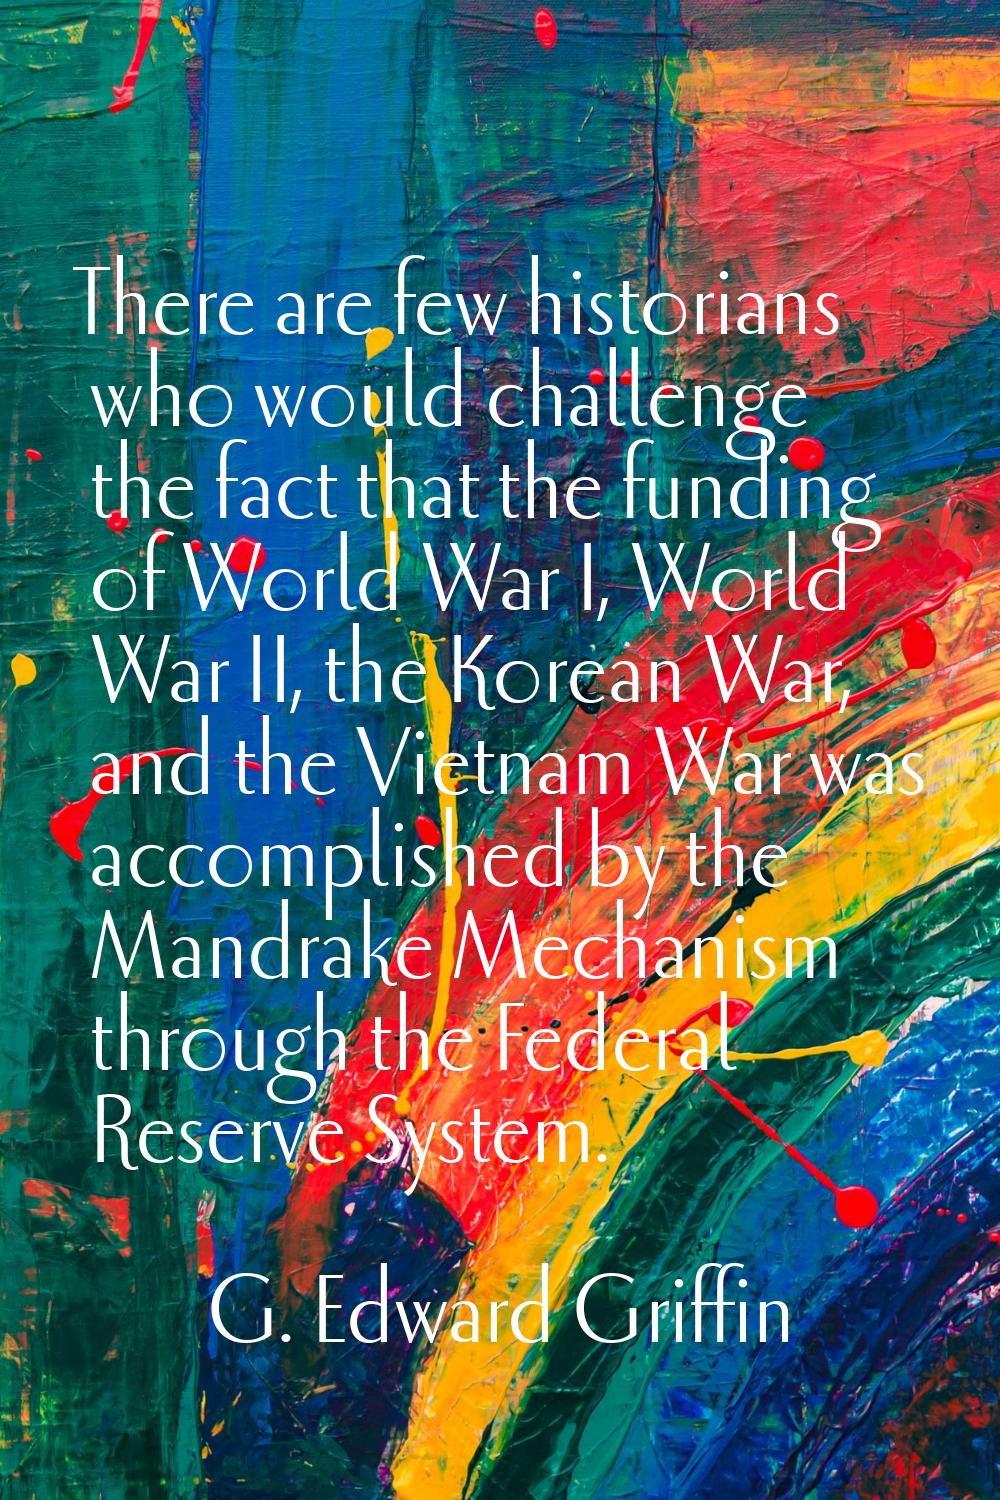 There are few historians who would challenge the fact that the funding of World War I, World War II